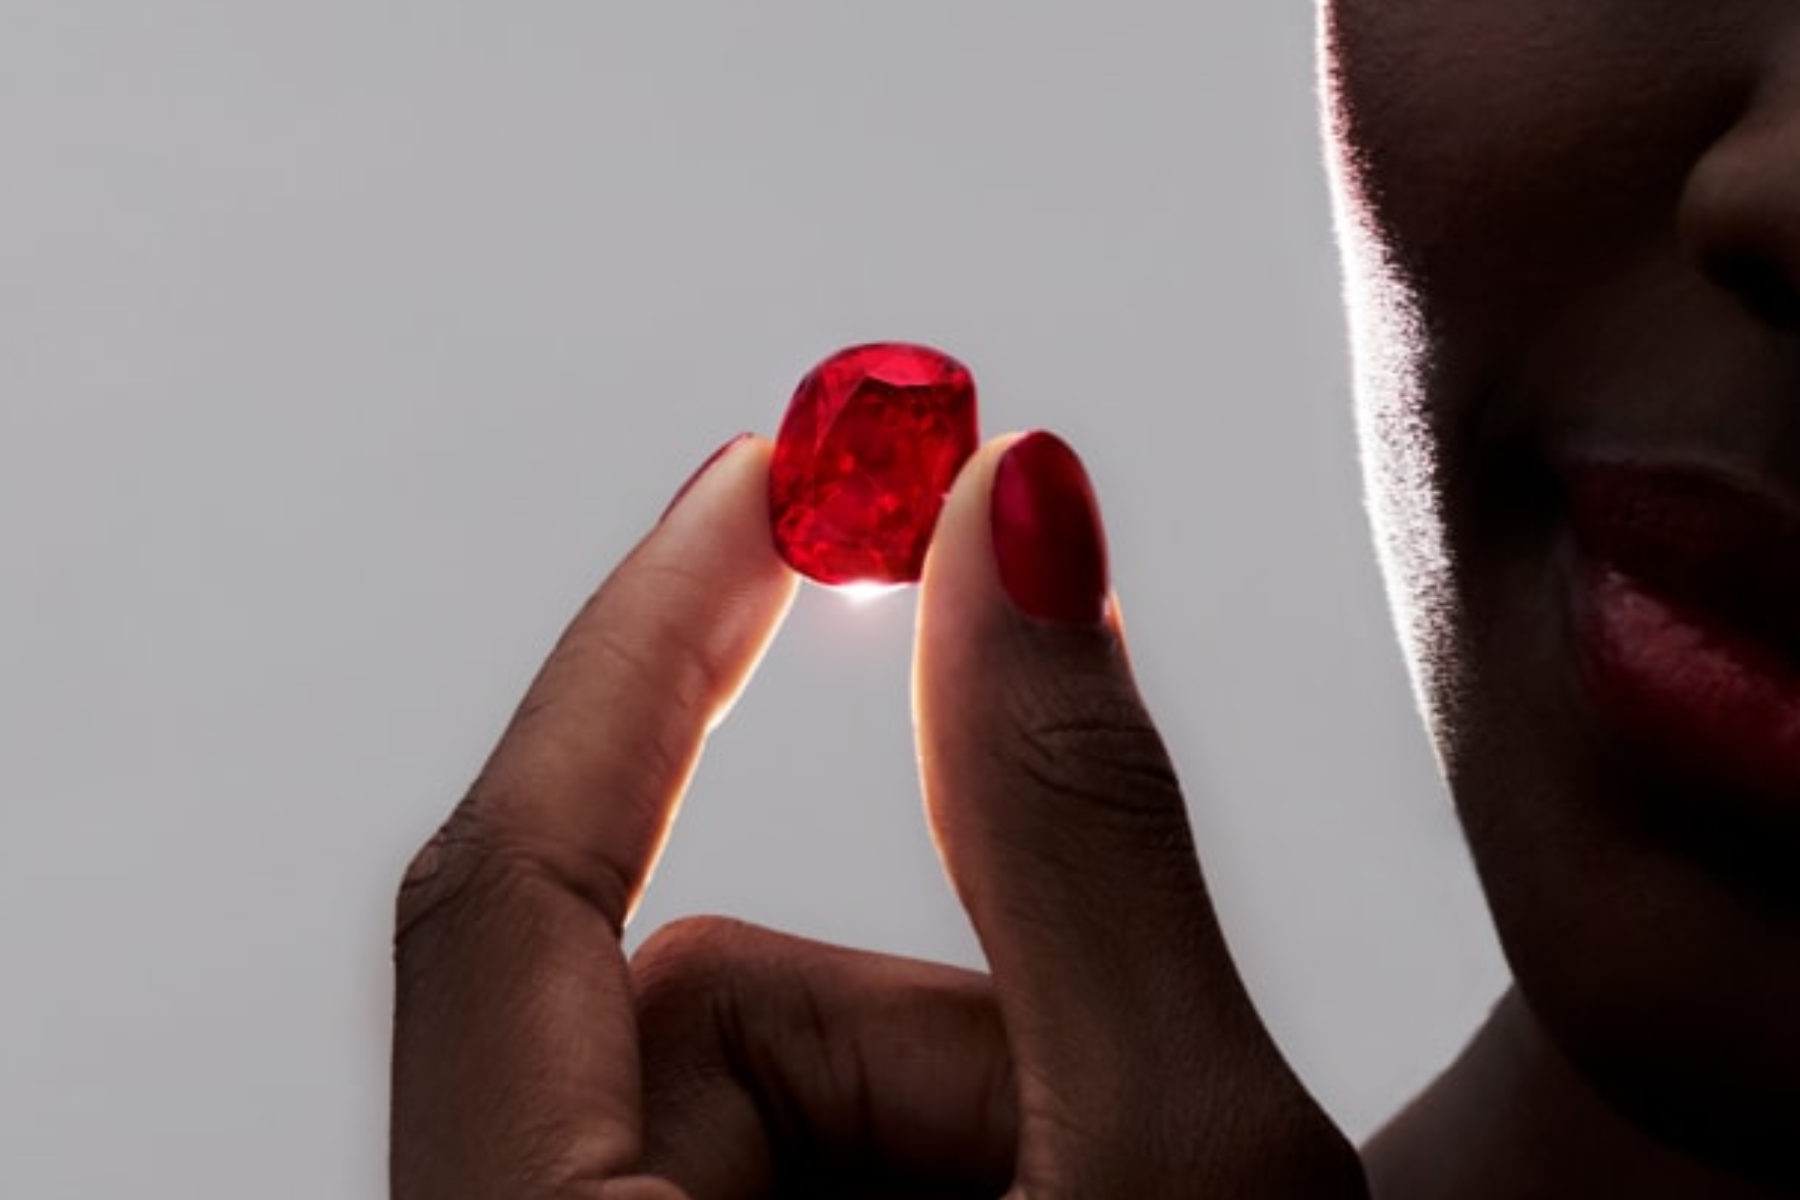 The gem held by a woman was cut from a record-breaking 101-carat rough stone unearthed in Mozambique